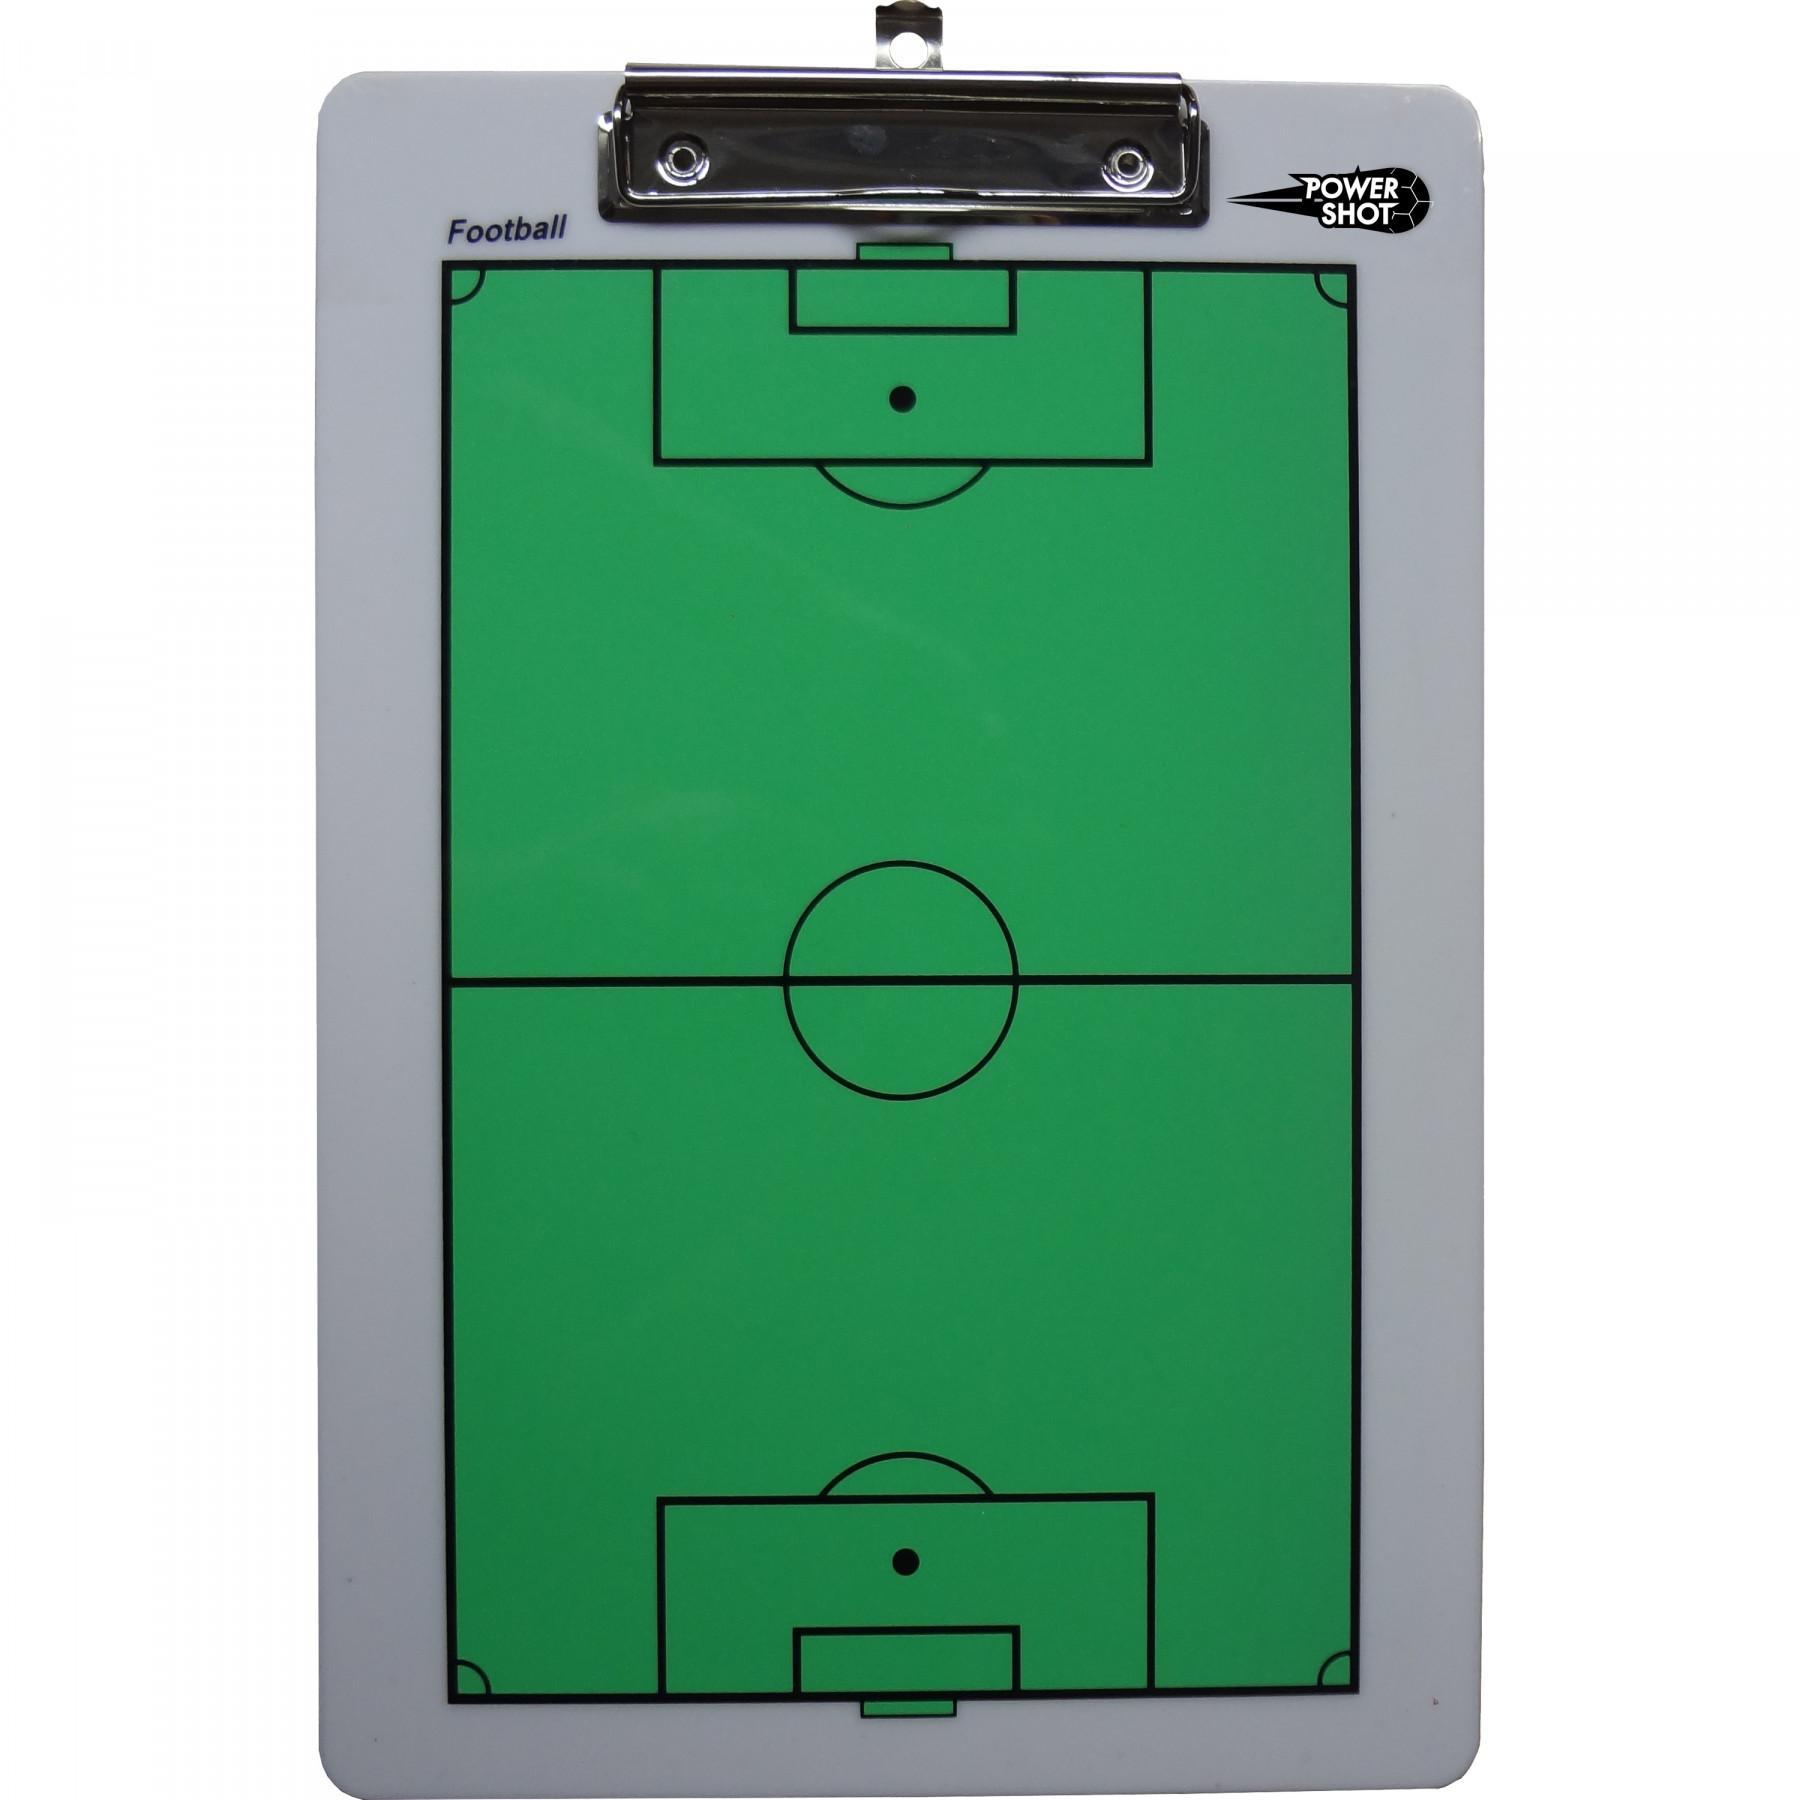 Double-sided soccer tactical panel PowerShot